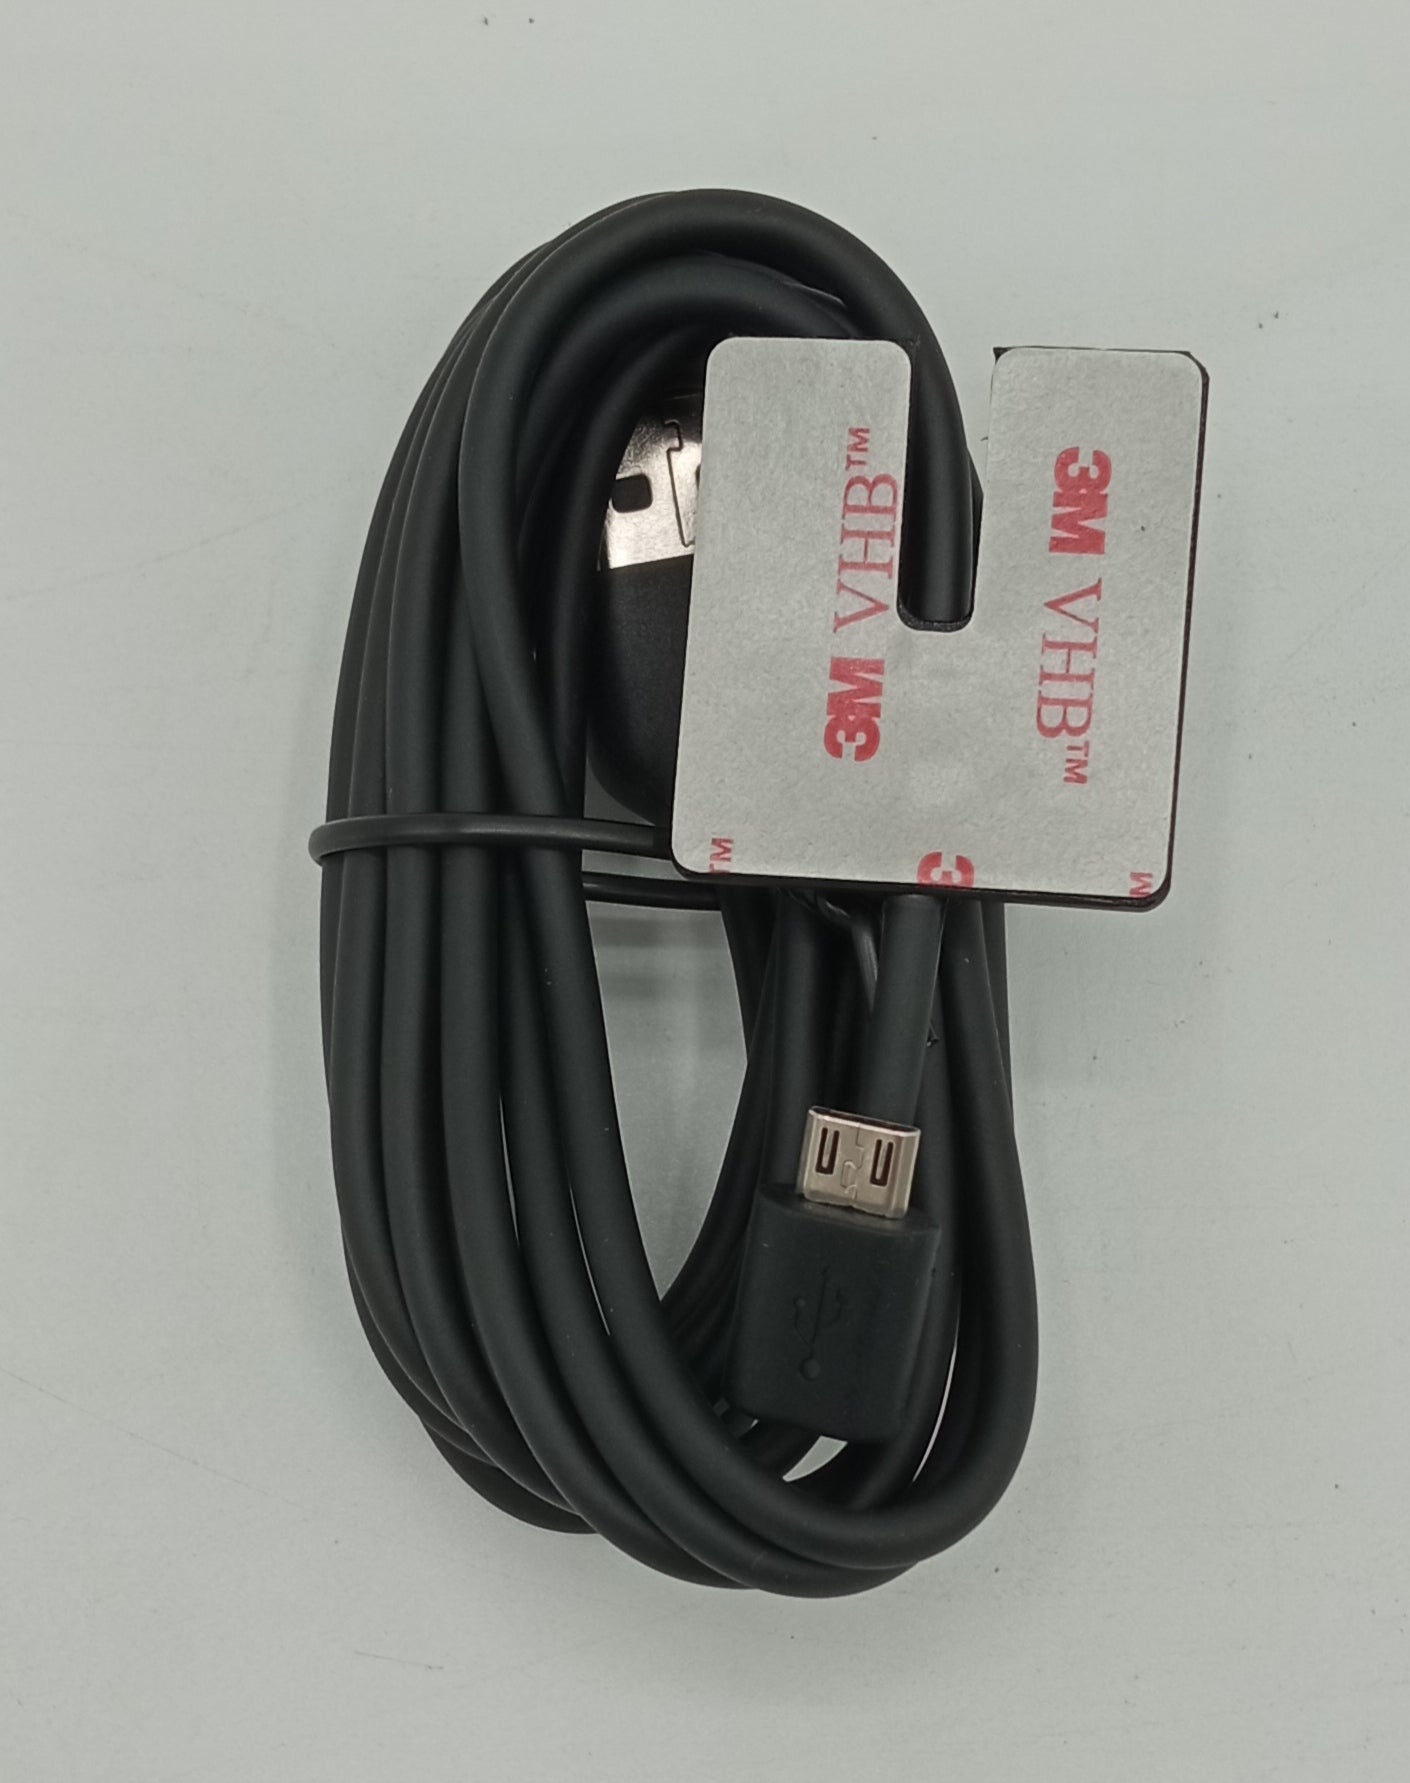 3M Android Micro USB Cable (2M) - 1 year warranty - Made in USA